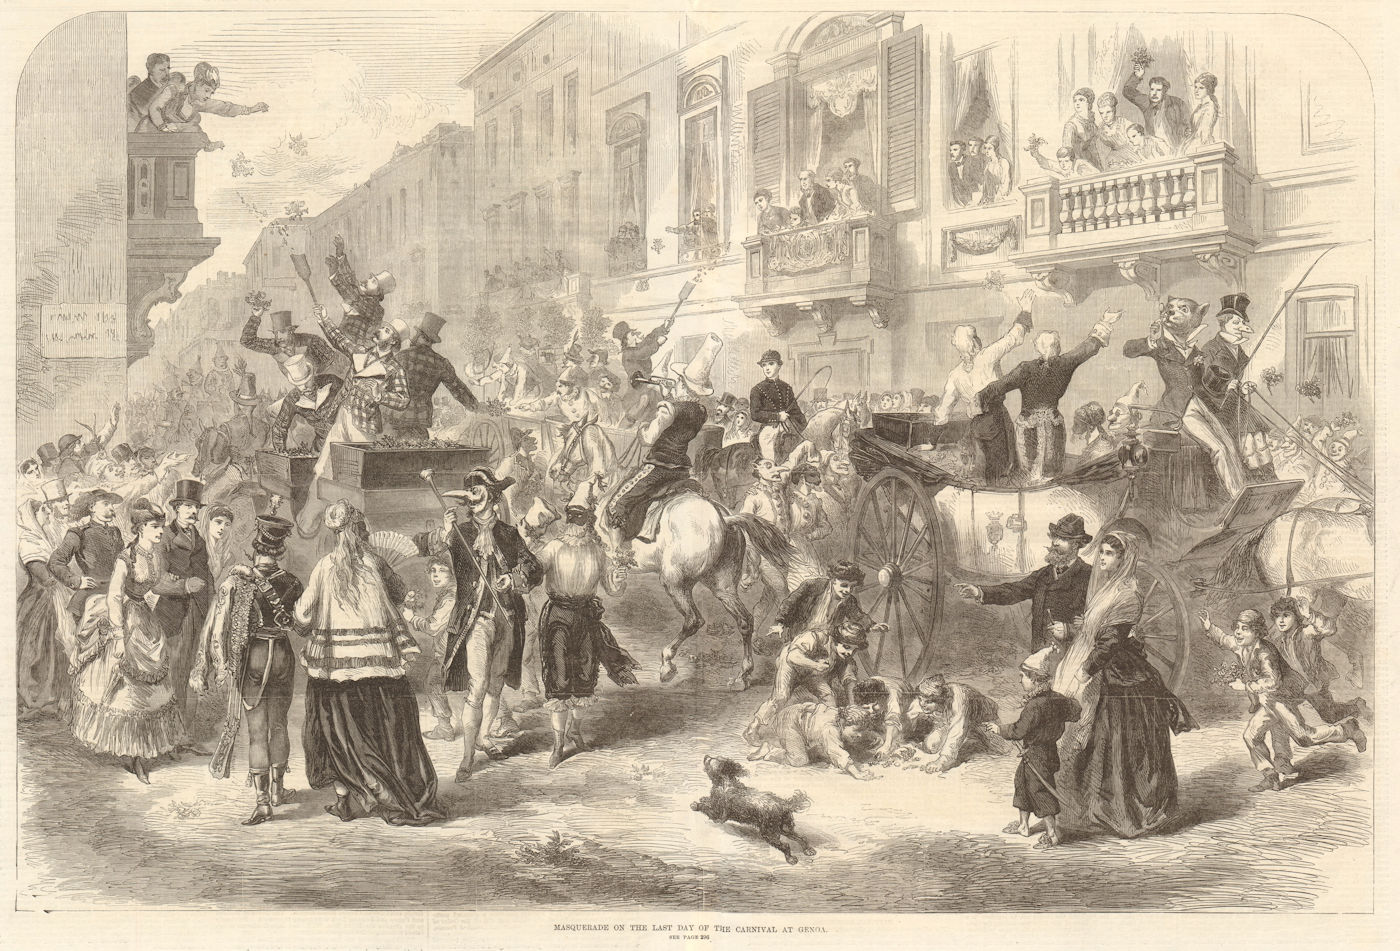 Associate Product Masquerade on the last day of the carnival at Genoa. Italy. Society 1870